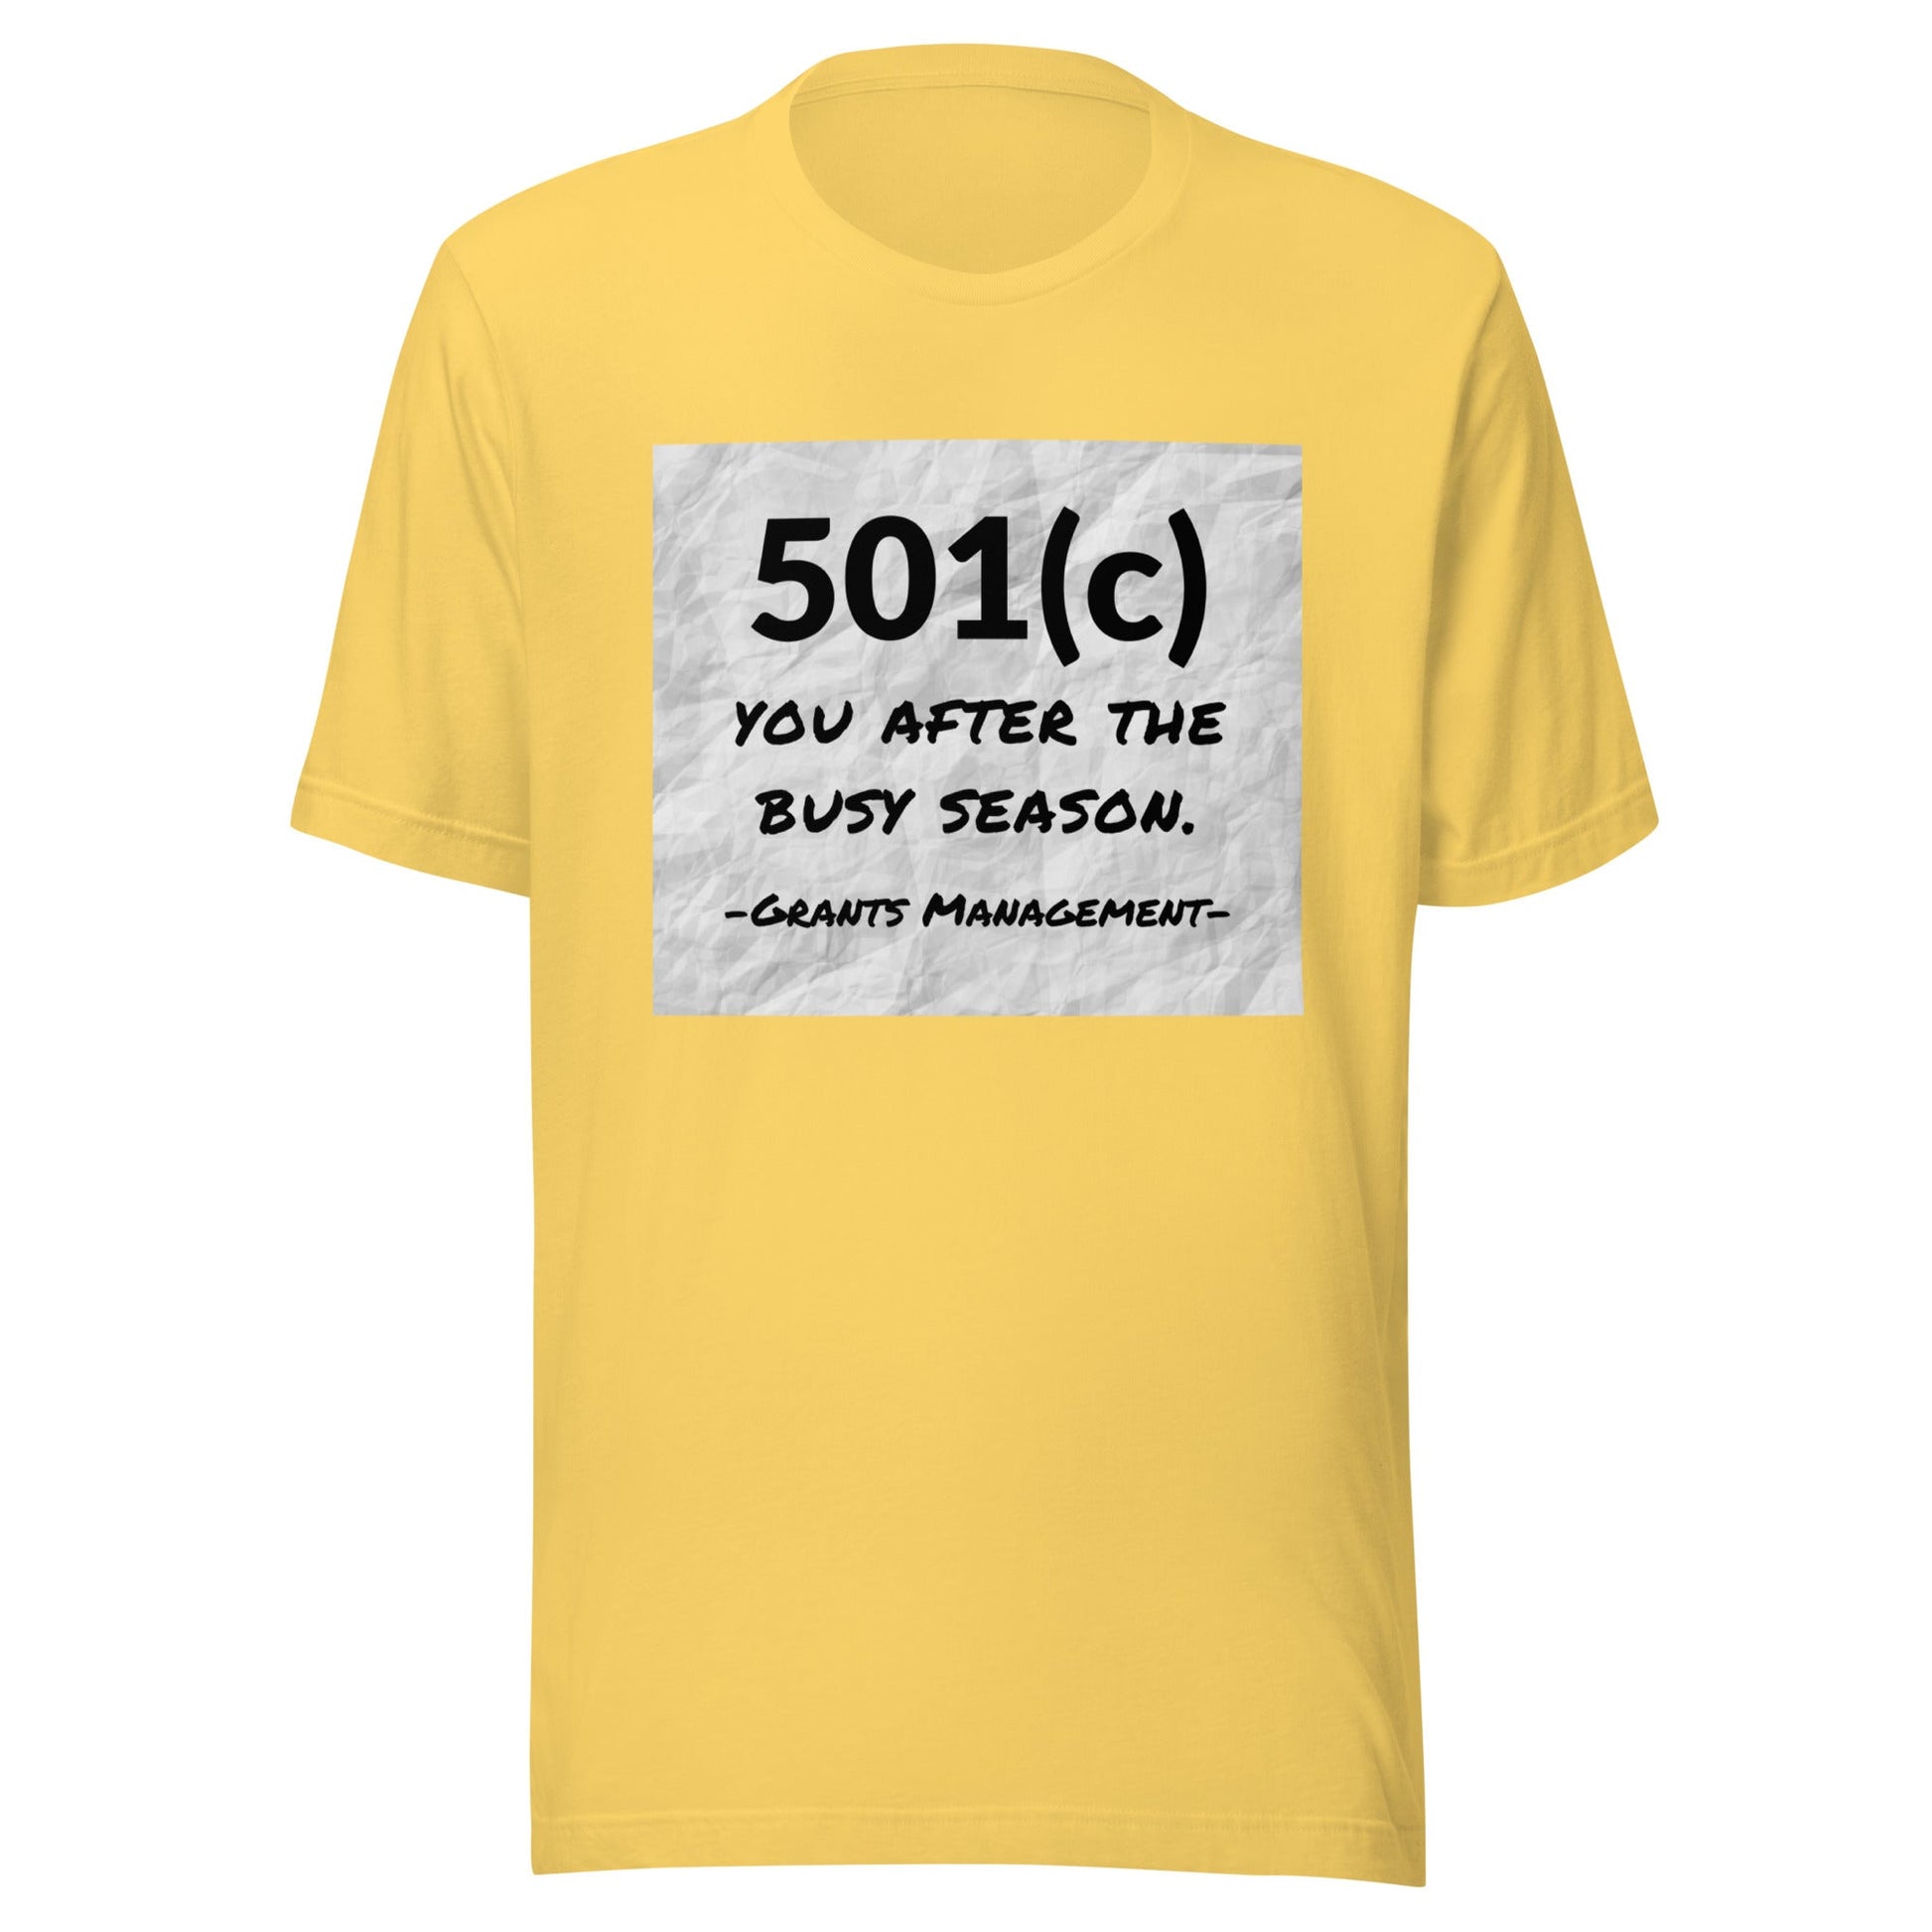 501(c) You After the Busy Season Grants Management Unisex t-shirt-recalciGrant